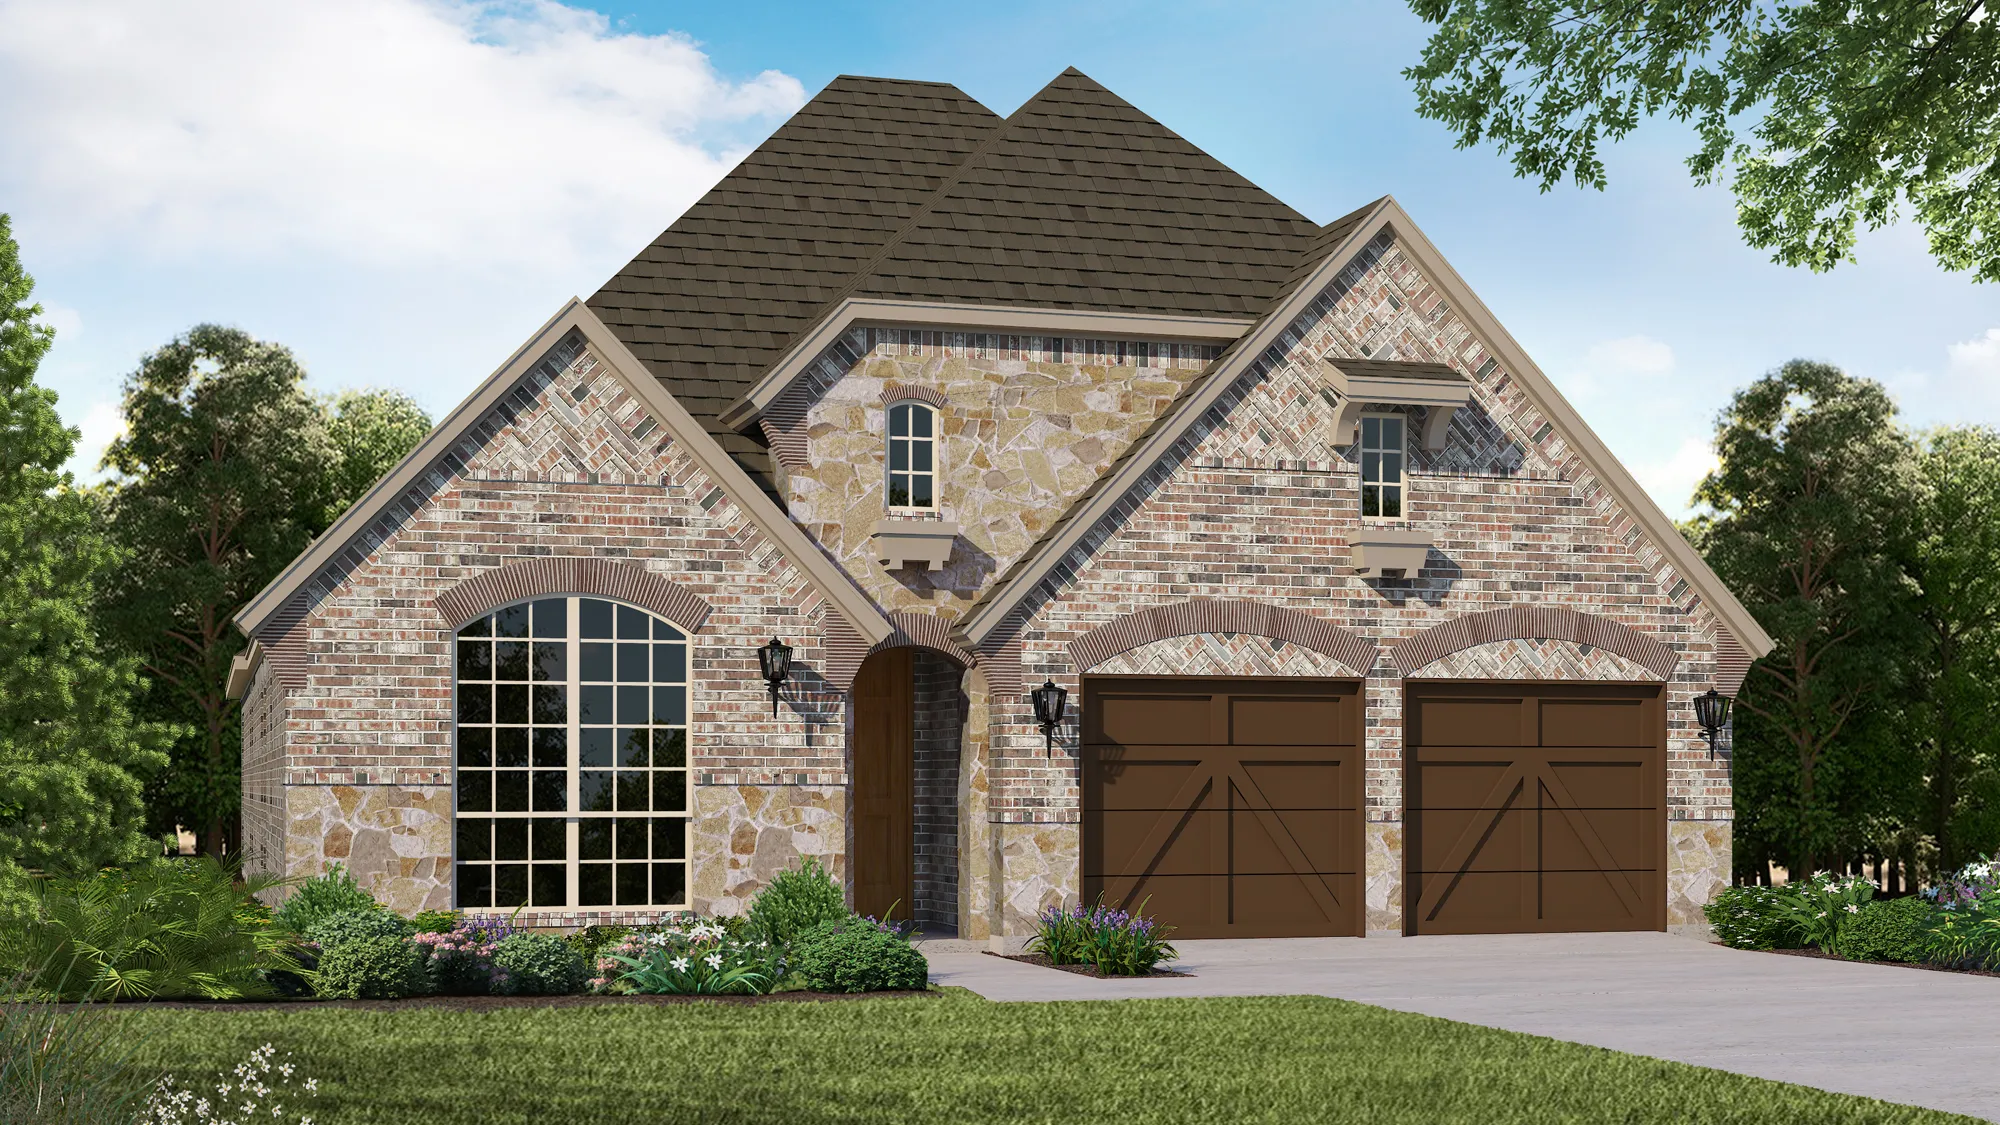 Plan 1120 Elevation E with Stone